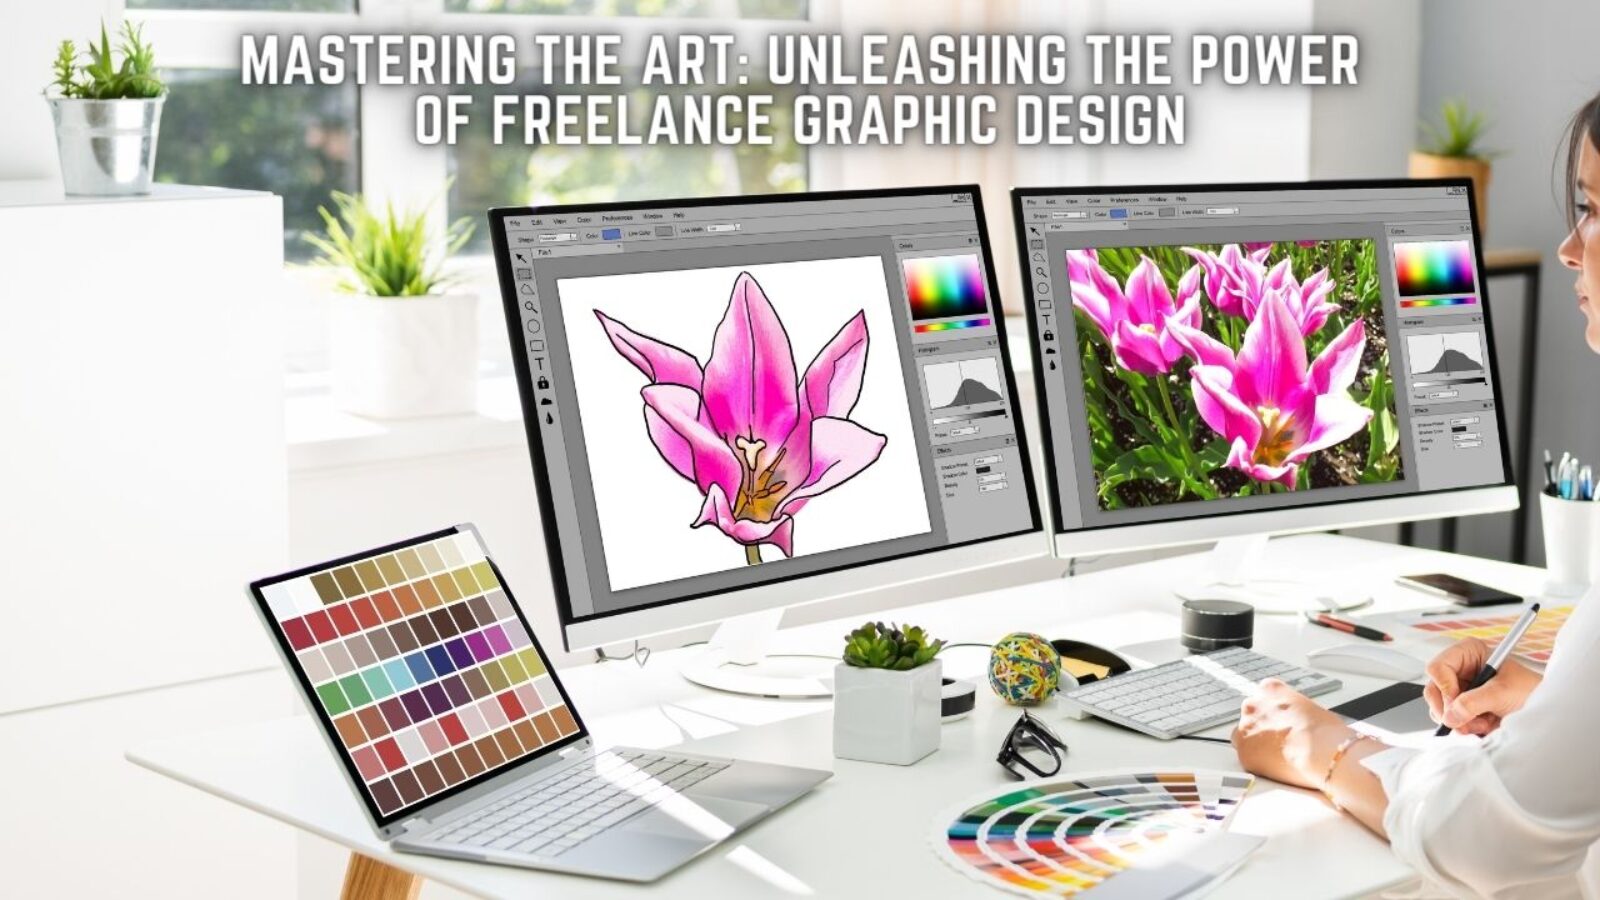 Mastering the Art: Unleashing the Power of Freelance Graphic Design